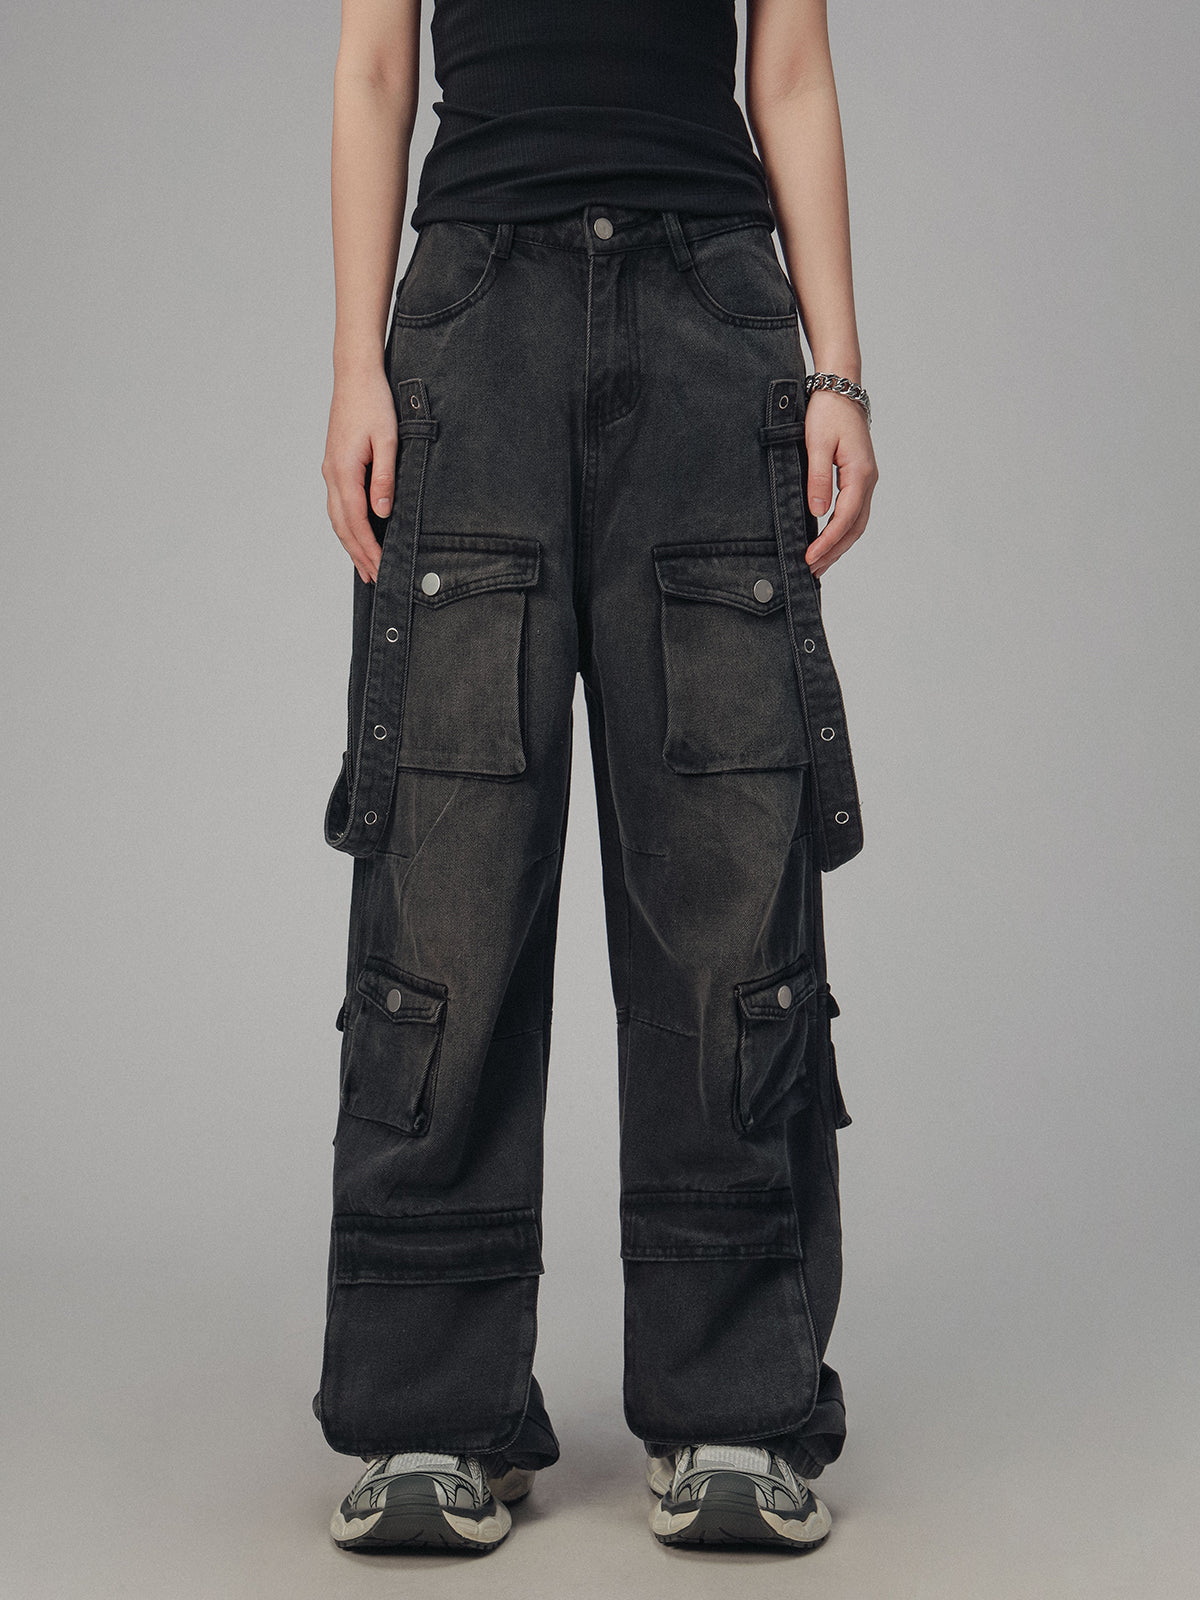 American Wash Distressed Jeans-Hose